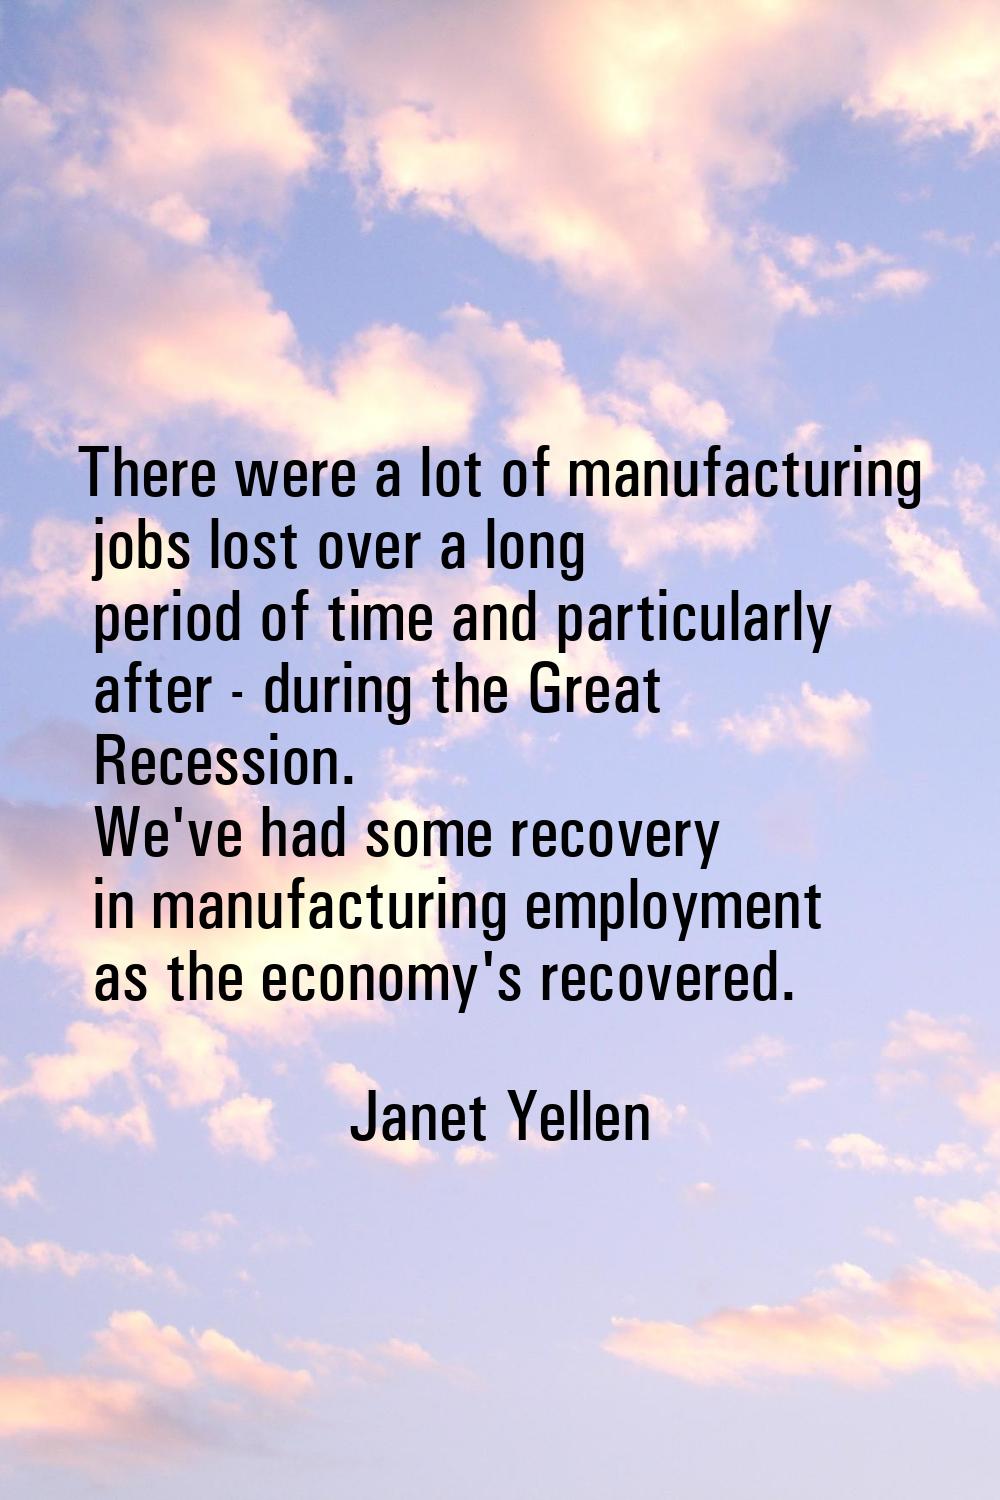 There were a lot of manufacturing jobs lost over a long period of time and particularly after - dur